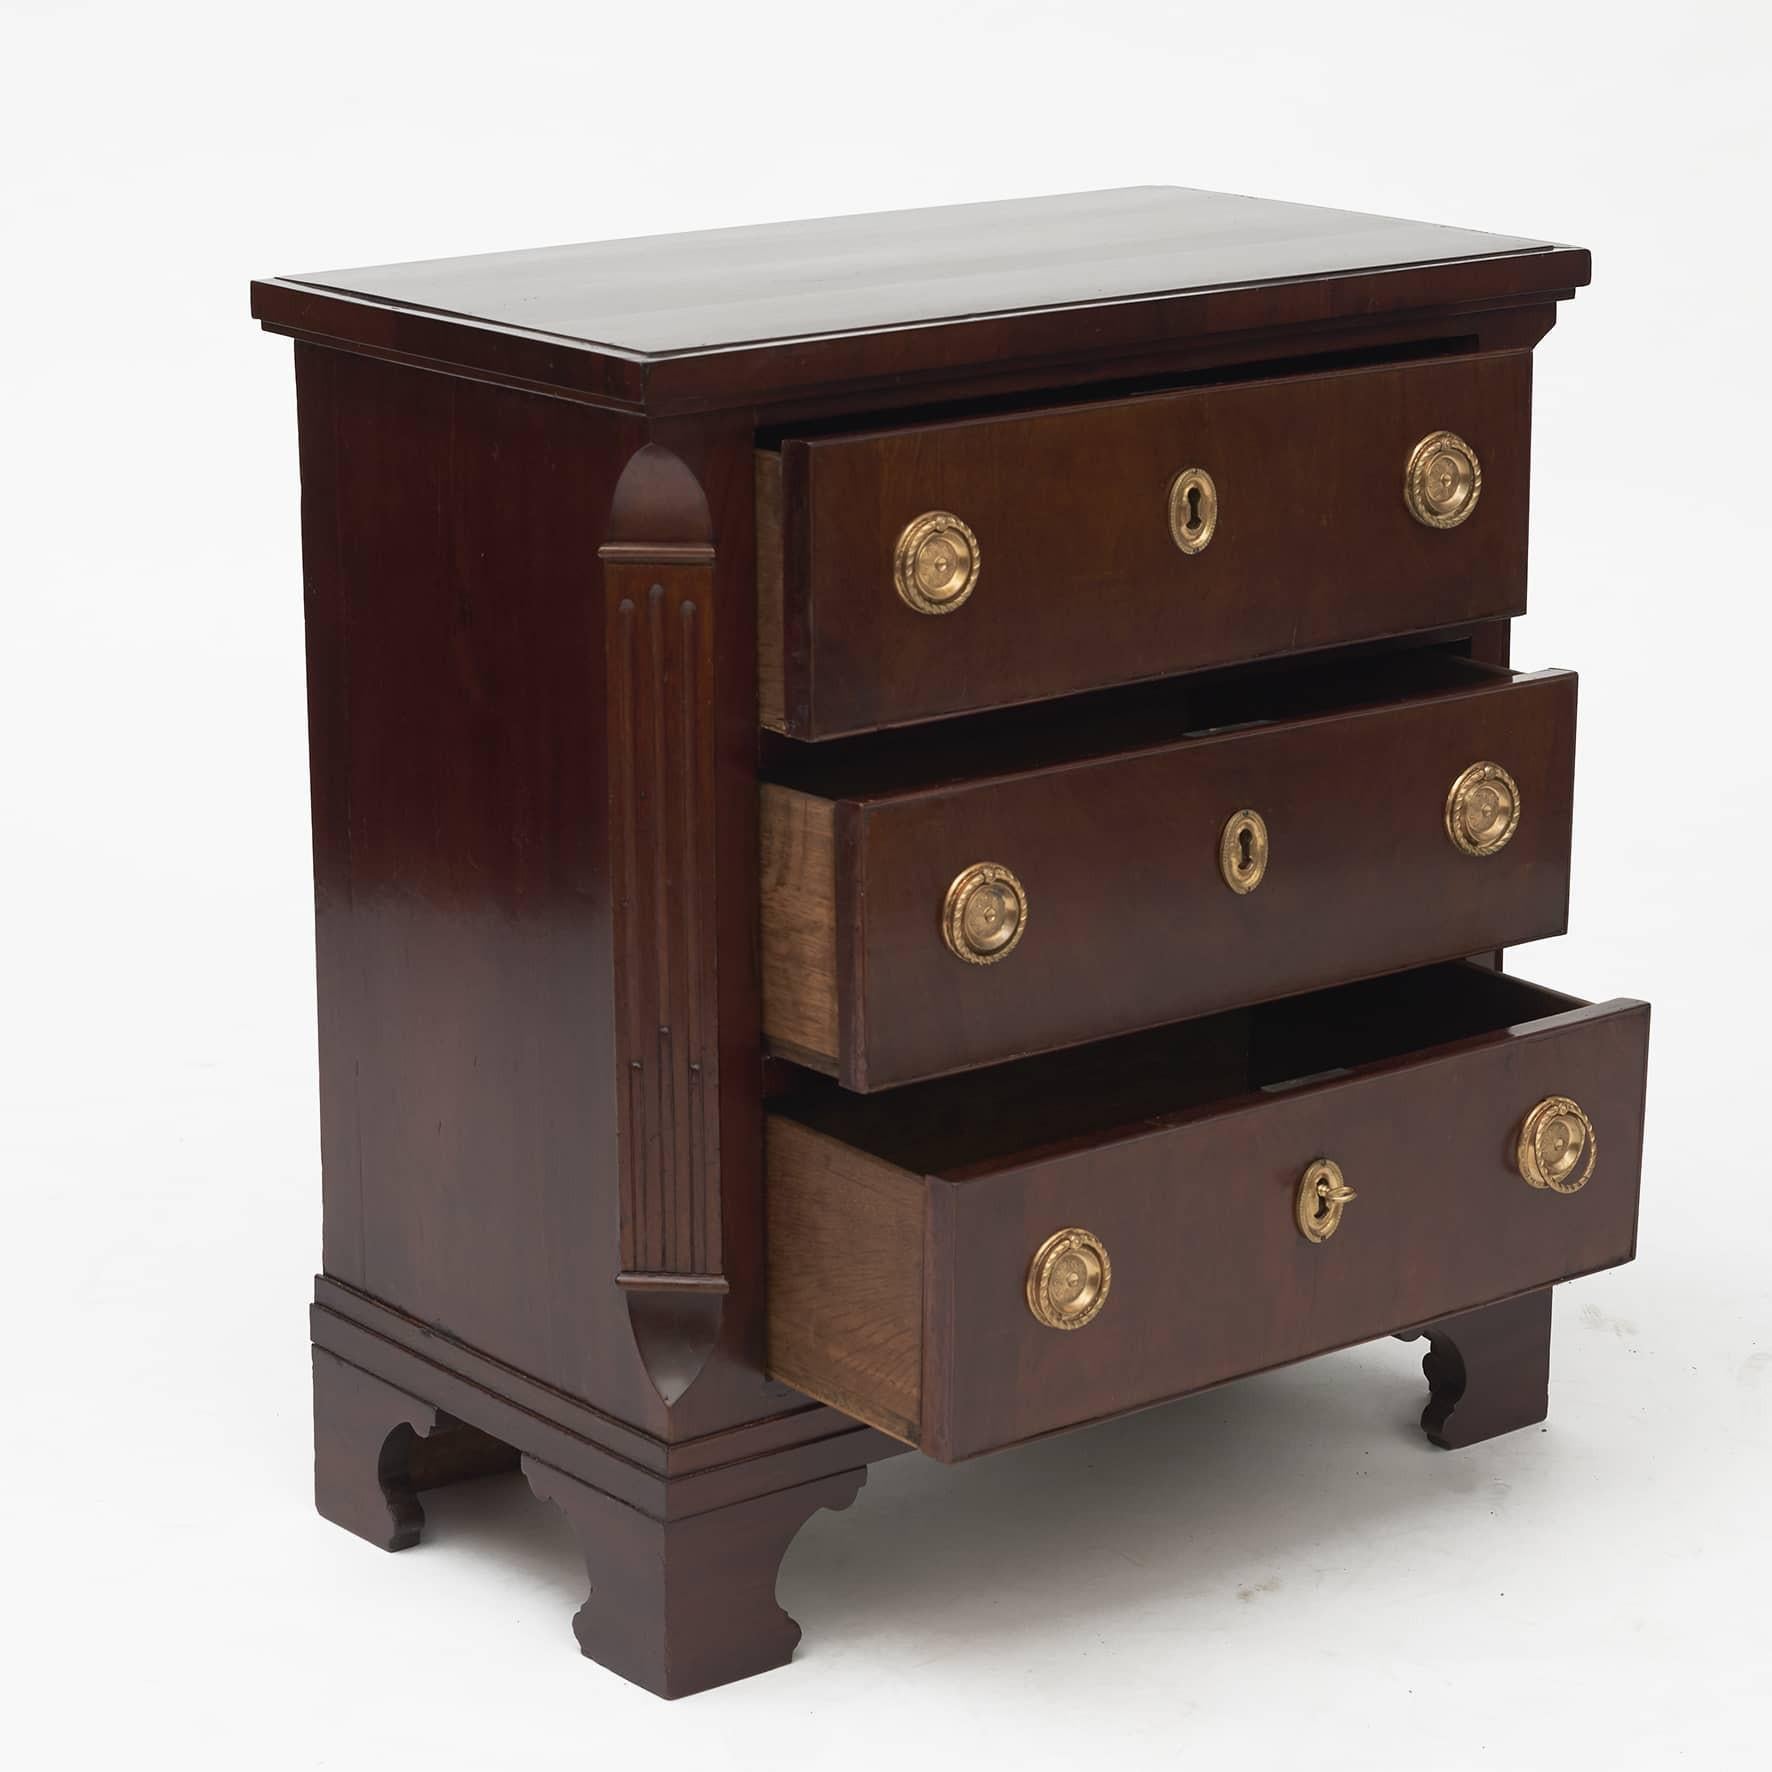 Louis XVI chest of drawers in Cuba mahogany veneered on oak.
Three drawers with original gilded bronze fittings flanked by canted corners with flutings.
Key of later date.
Denmark, Copenhagen 1780-1790.